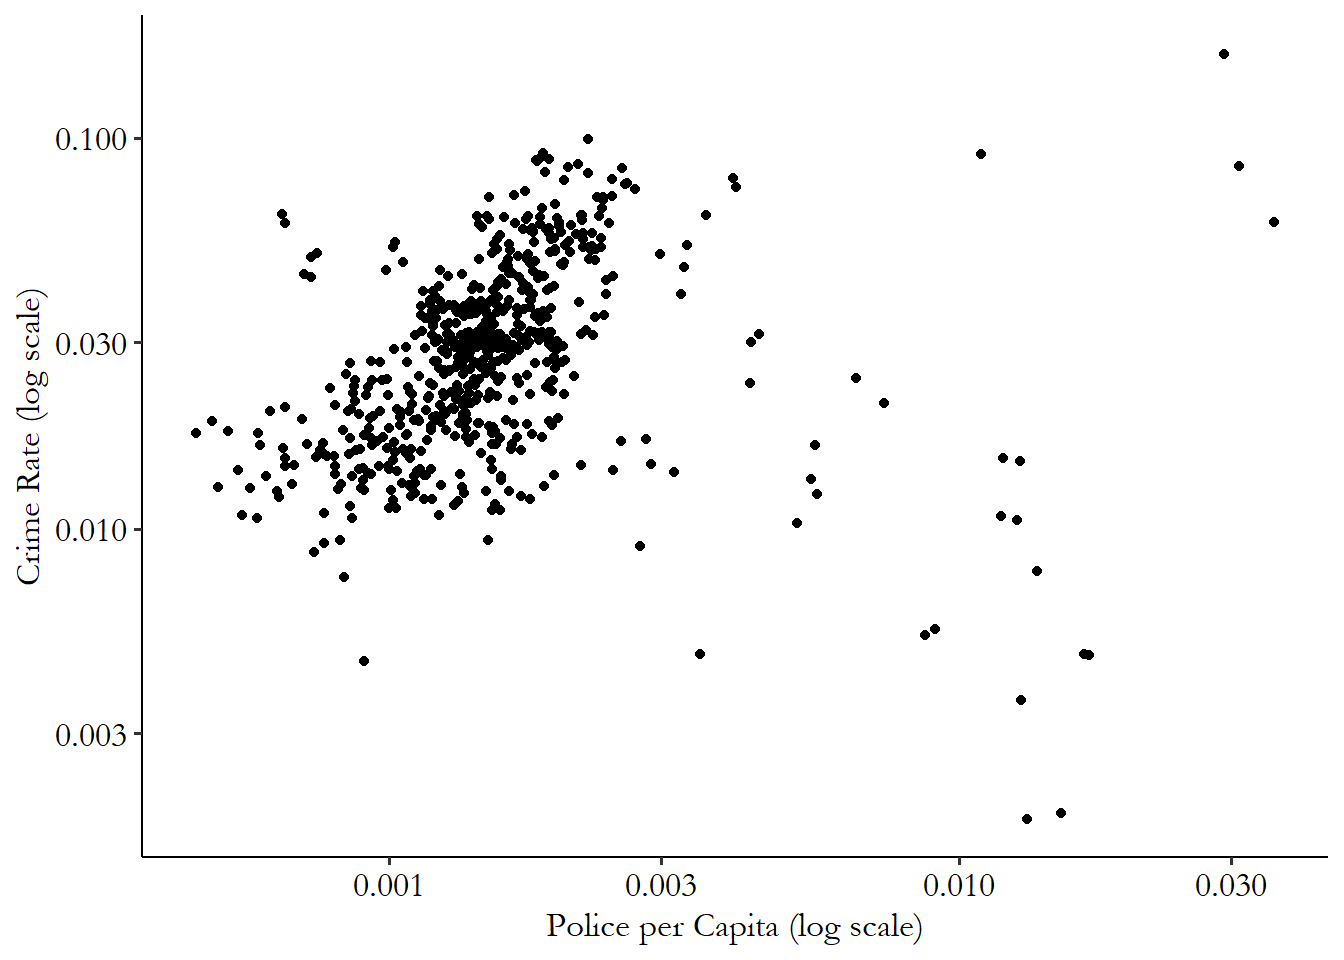 A scatterplot of police per capita and crime rates in North Carolina, showing a positive relationship